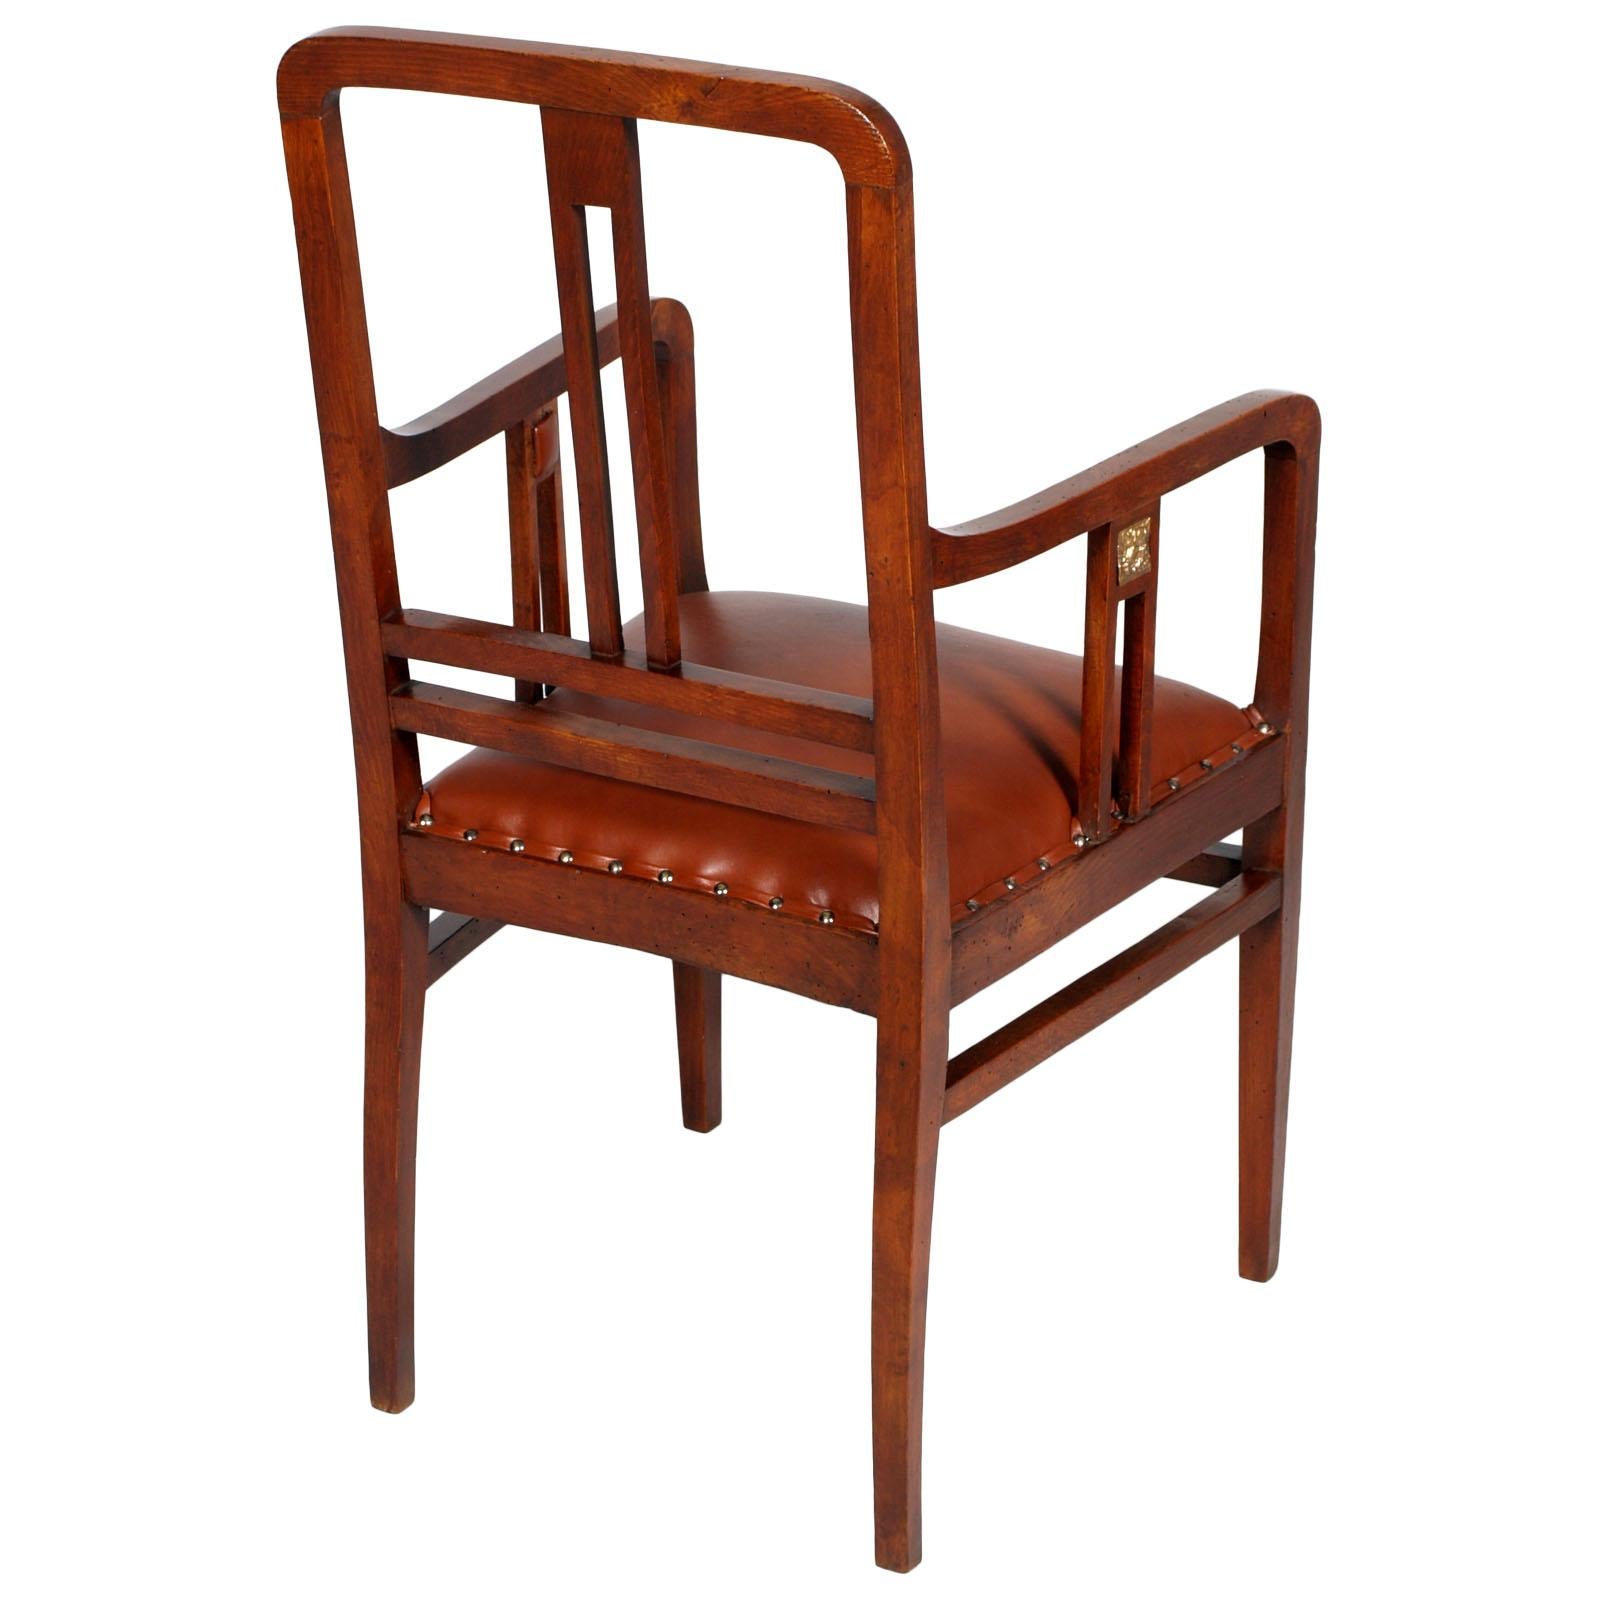 Era Art Nouveau, early 20th century museal modernist Wiener Werkstätte armchair restored re-upholstered leather by Josef Hoffmann.
Solid walnut wood structure with original patina, with cast bronze plates applied in the backrest and laterally in